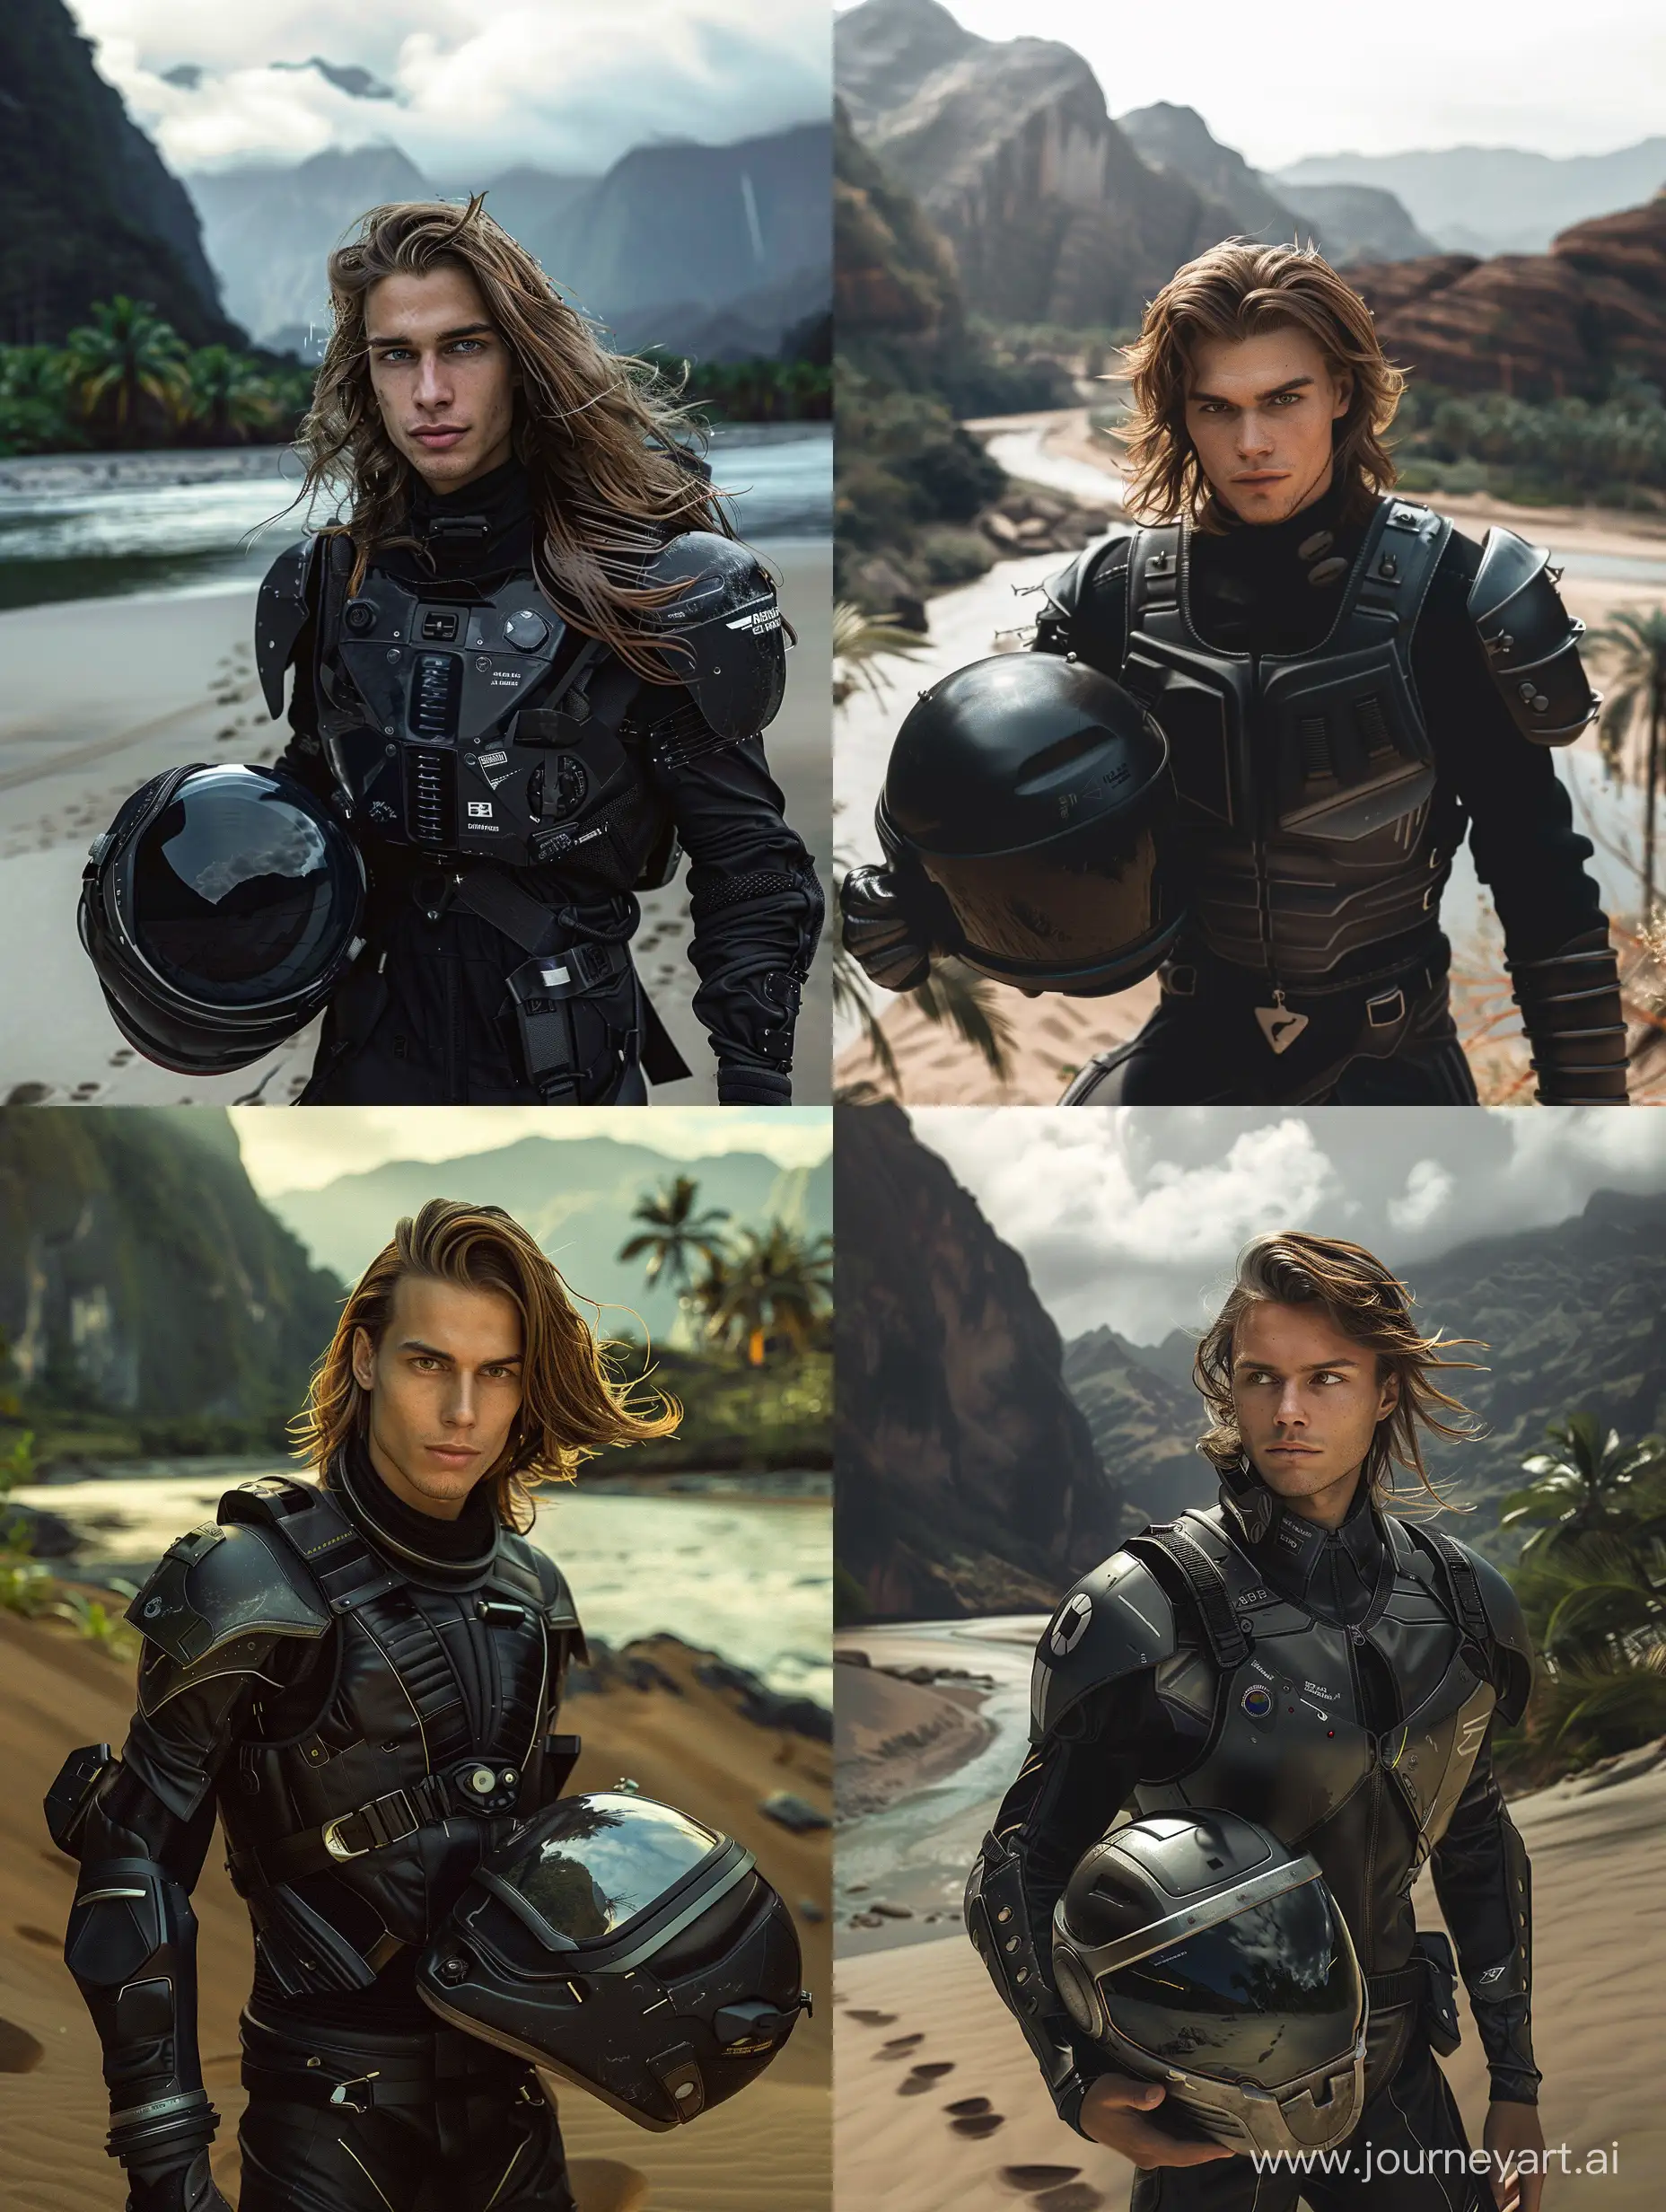 Handsome-25YearOld-Man-in-Space-Armor-with-Helmet-by-the-River